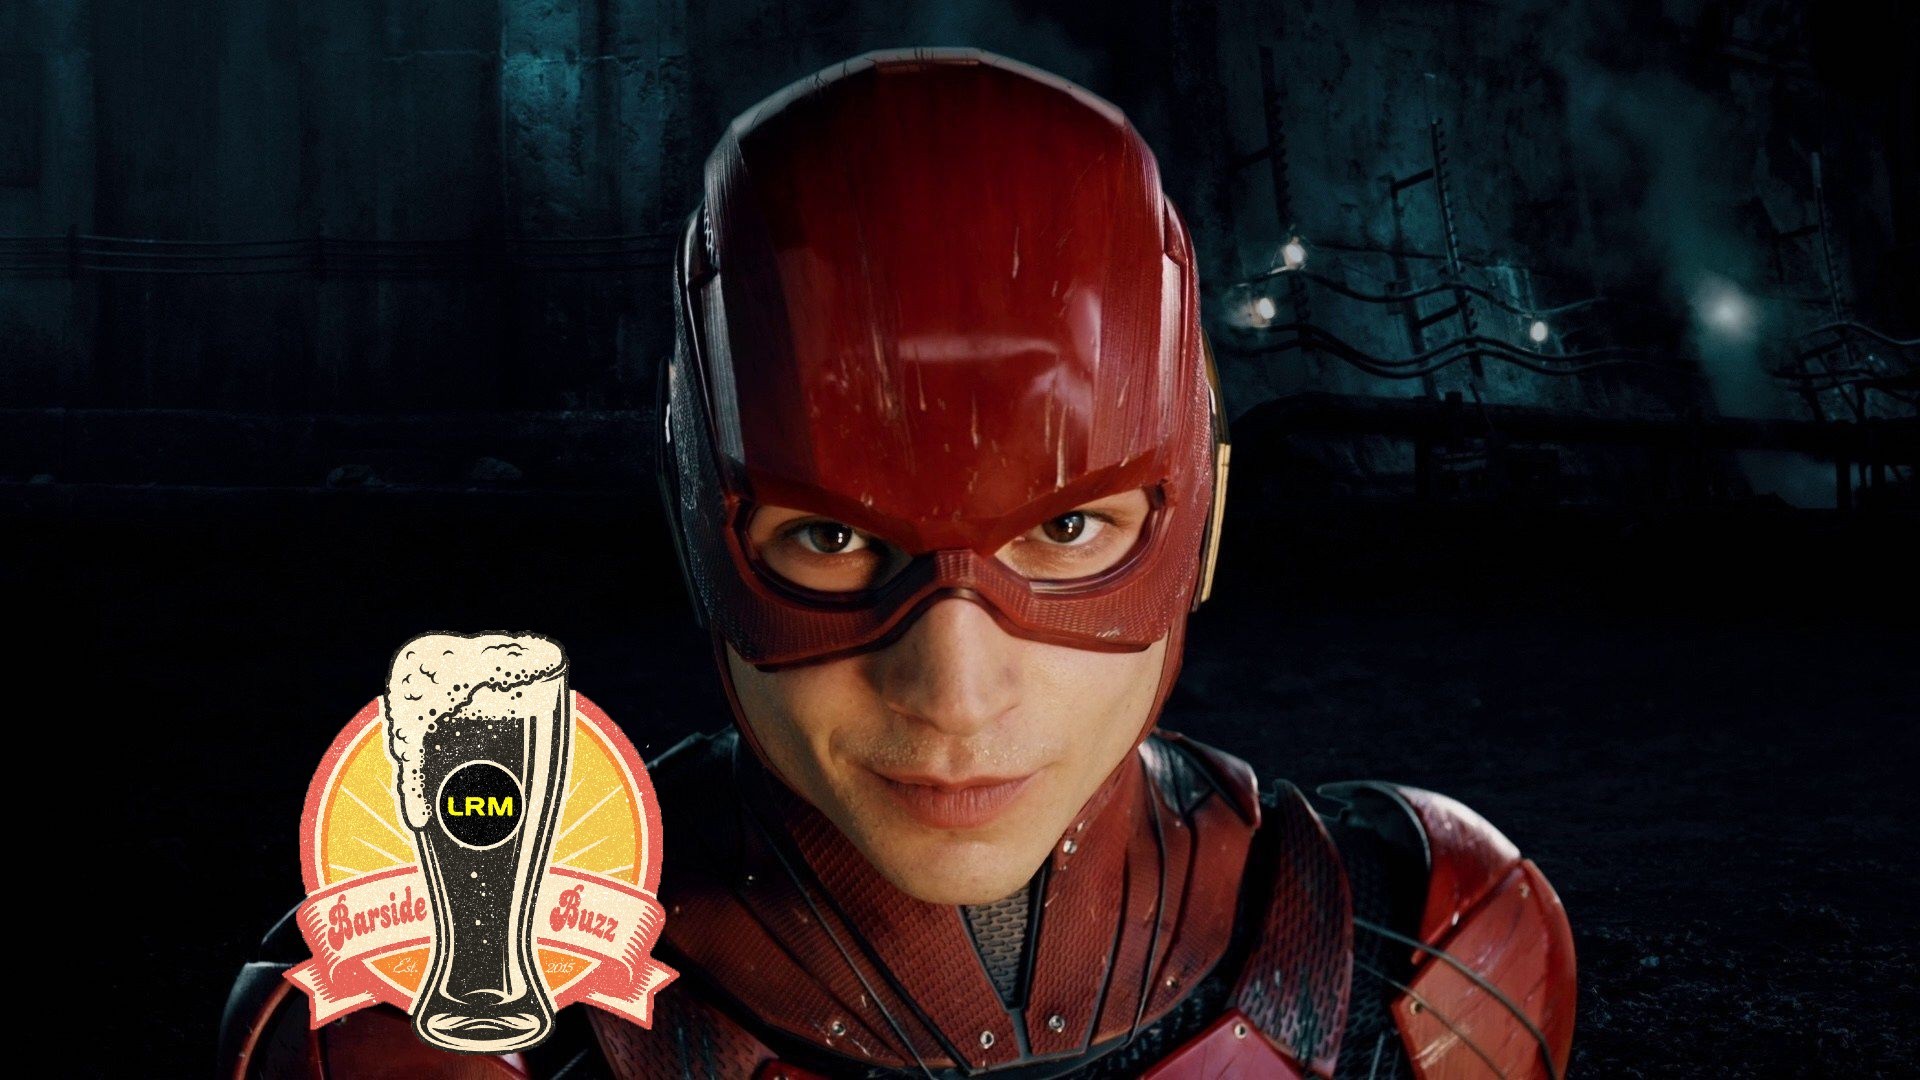 Ezra Miller out after The Flash, no matter what happens? That's the latest Barside Buzz doing the rounds today. Read on for more information.